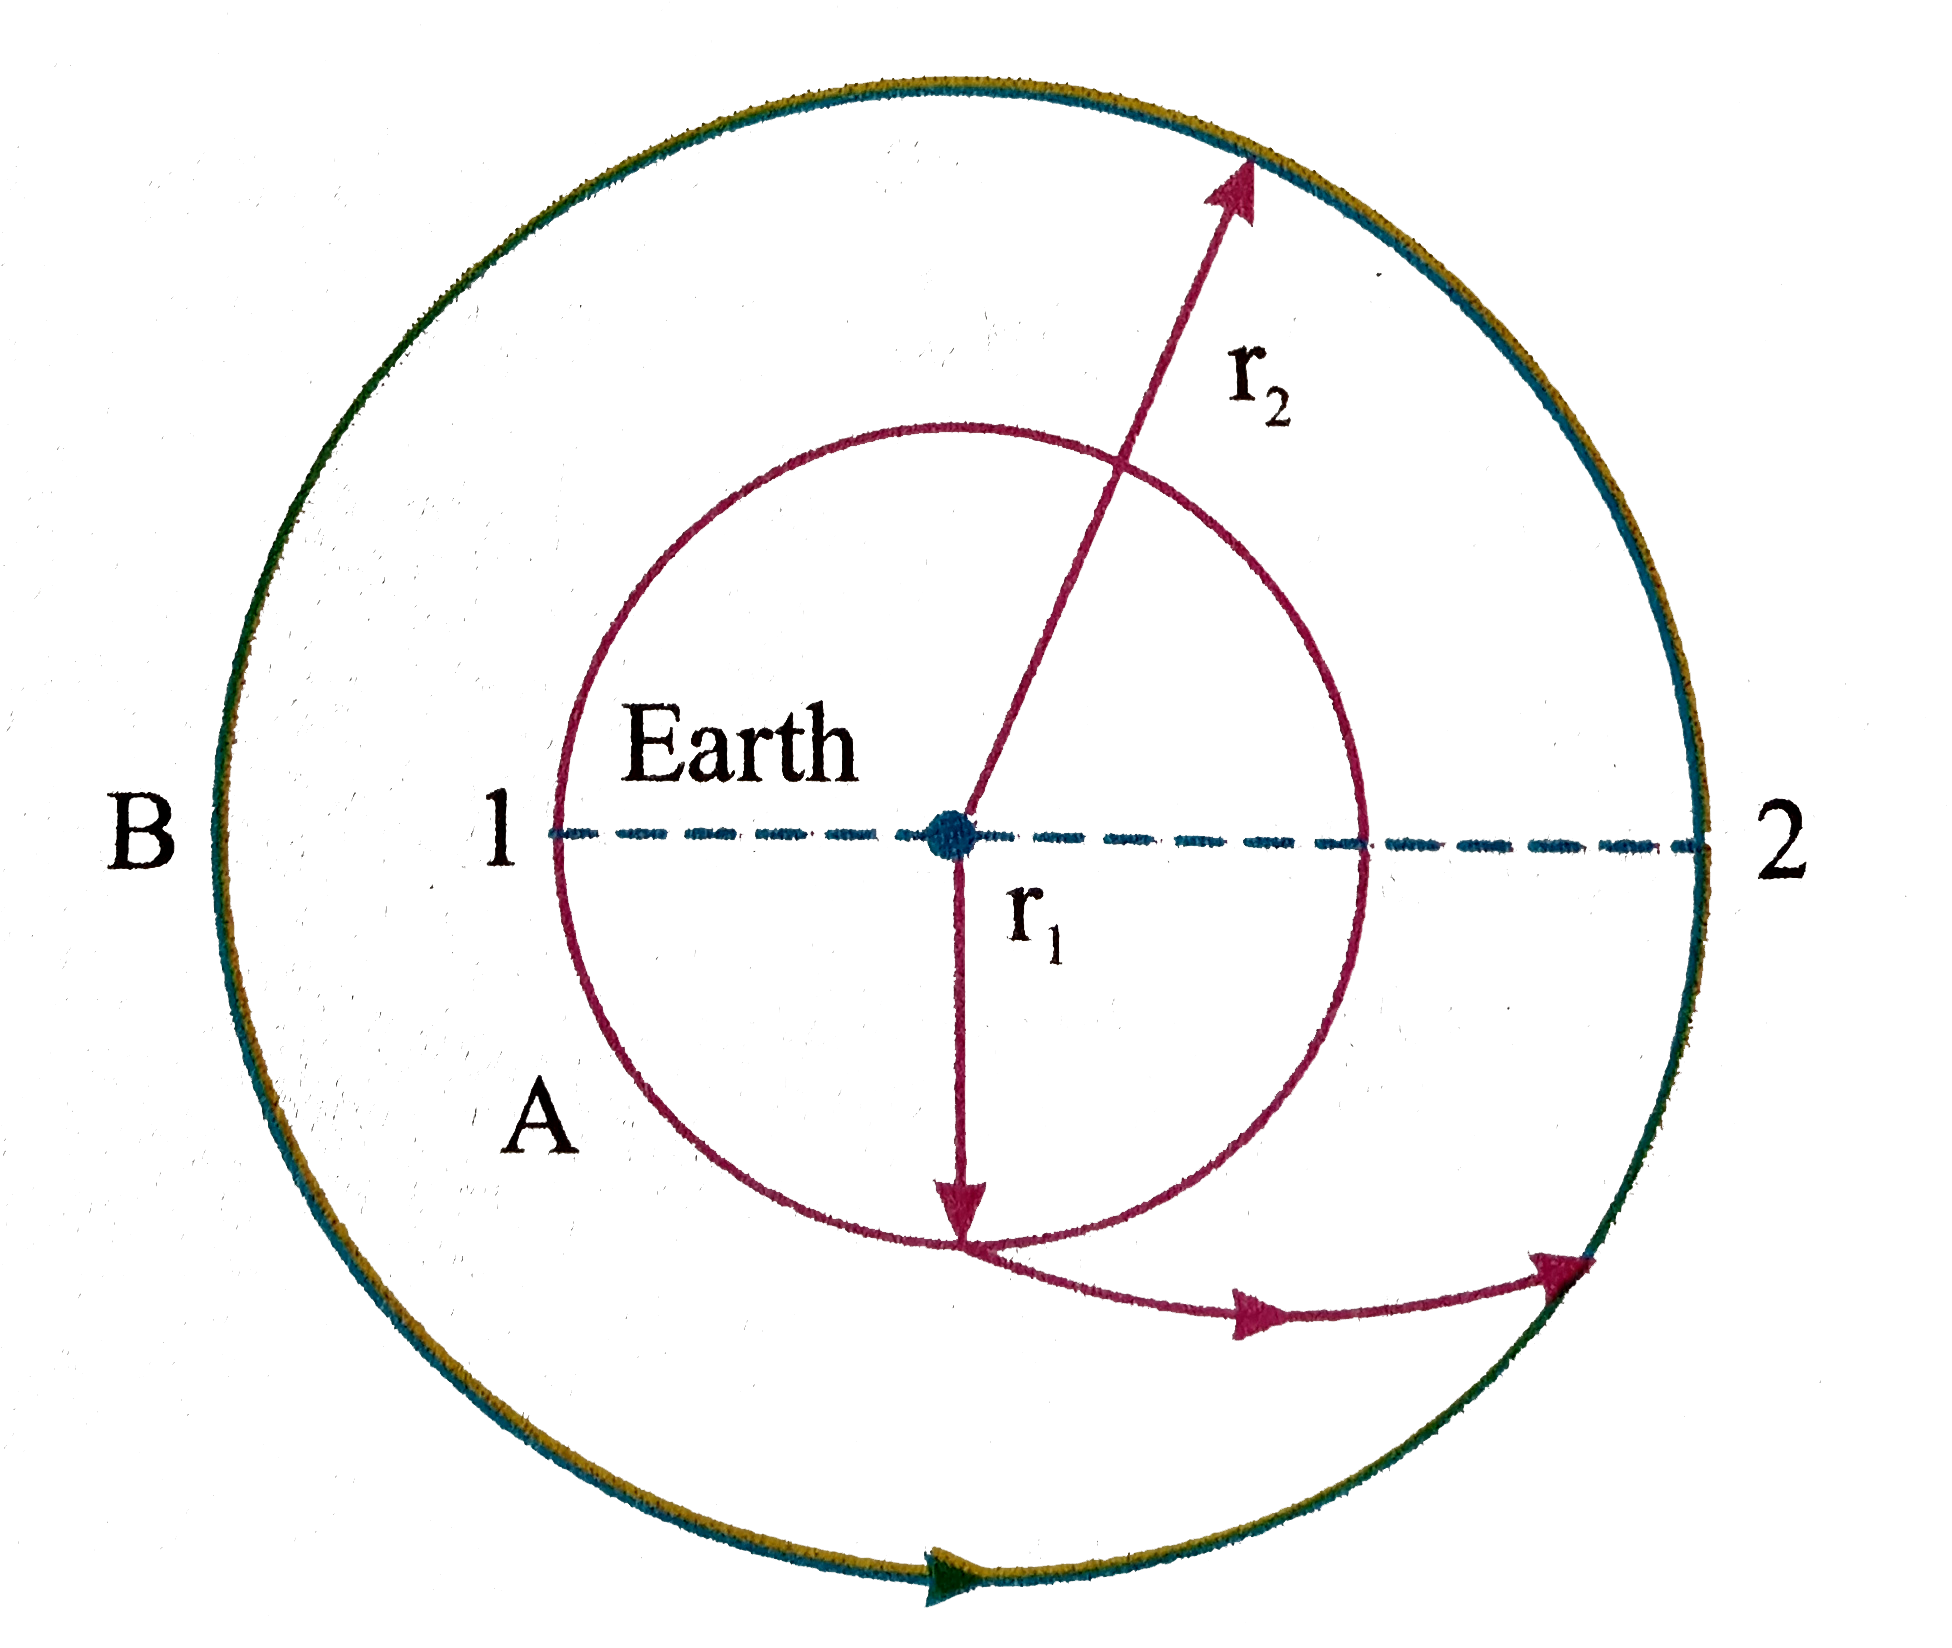 Two satellites A and B are revolving around the earth in circular orbits of radius r(1) and r(2) respectively with r(1)ltr(2). Plane of motion of the two are same. At position 1, A is given an impulse in the direction of velocity by firing a rocket so that it follows an elliptical path to meet B at position 2 as shown. focal lengths of the elliptical path are r(1) and r(2) respectively. at position 2, A is given another impulse so that velocities of A and B at 2 become equal and the two move together. for any elliptical path of the satellite time period of revolution is given Kepler's planetry law as T^(2)alphar^(3) where a is semi-major axis of the ellipse which is (r(1)+r(2))/2 in this case. also angular momentum of any satellite revolving around the earth will remain a constant about earth's centre as force of gravity on the satellite which keeps it in elliptical path is given its position vector relative to the earth centre.   When A is given its first impulse at that moment